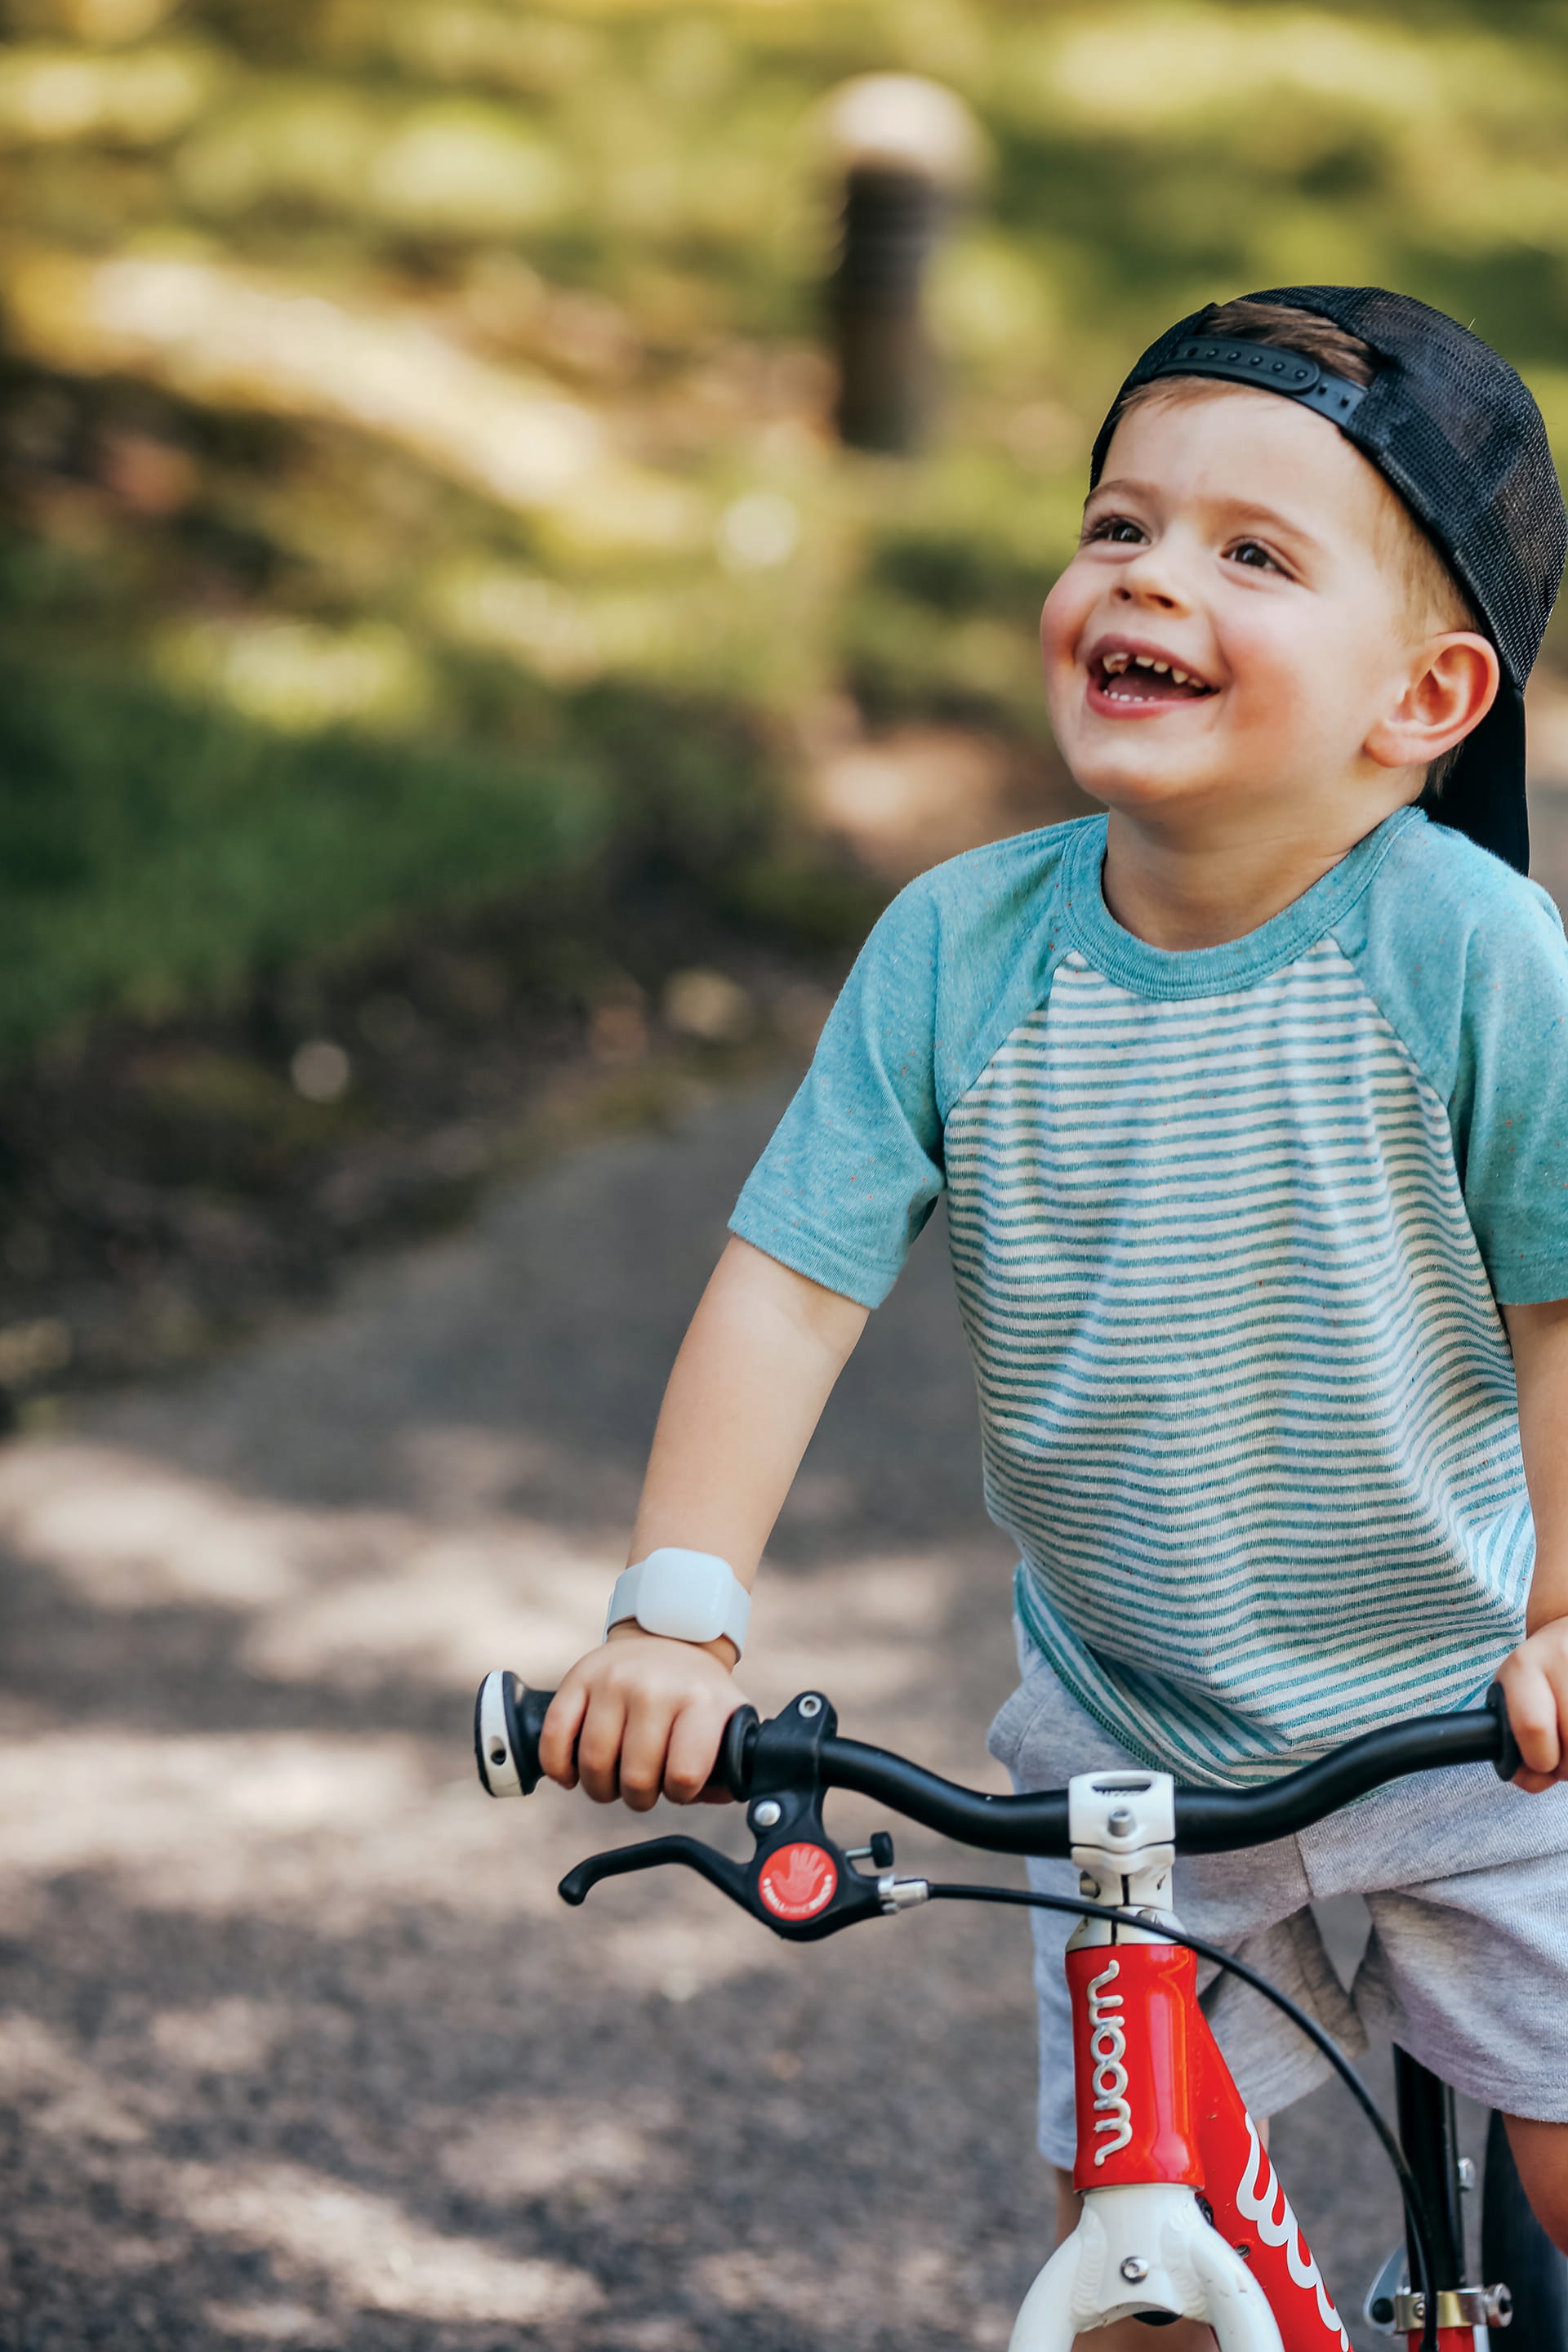 A happy child on a bicycle with the Littlebird CareTracker on their arm 